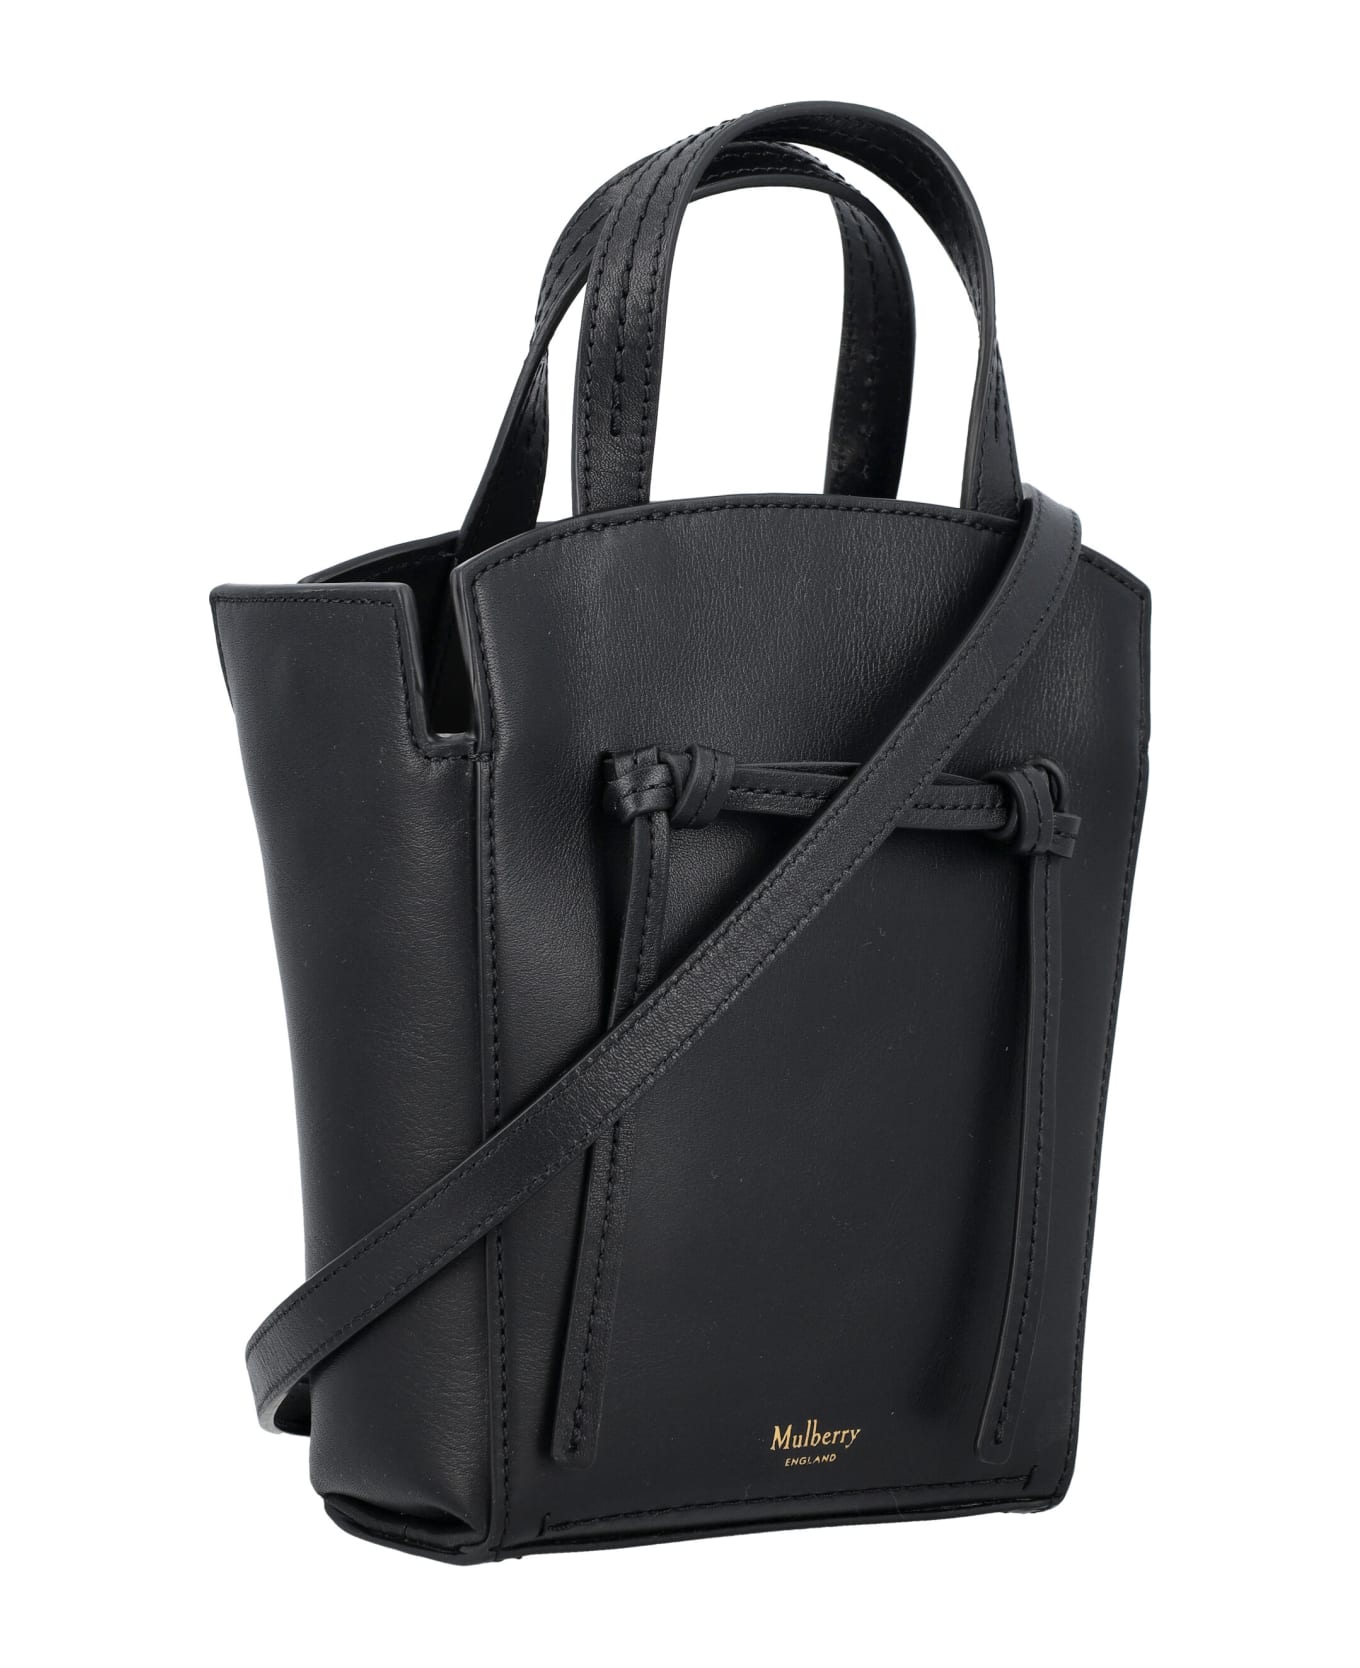 Mulberry Clovelly Mini Tote - BLACK